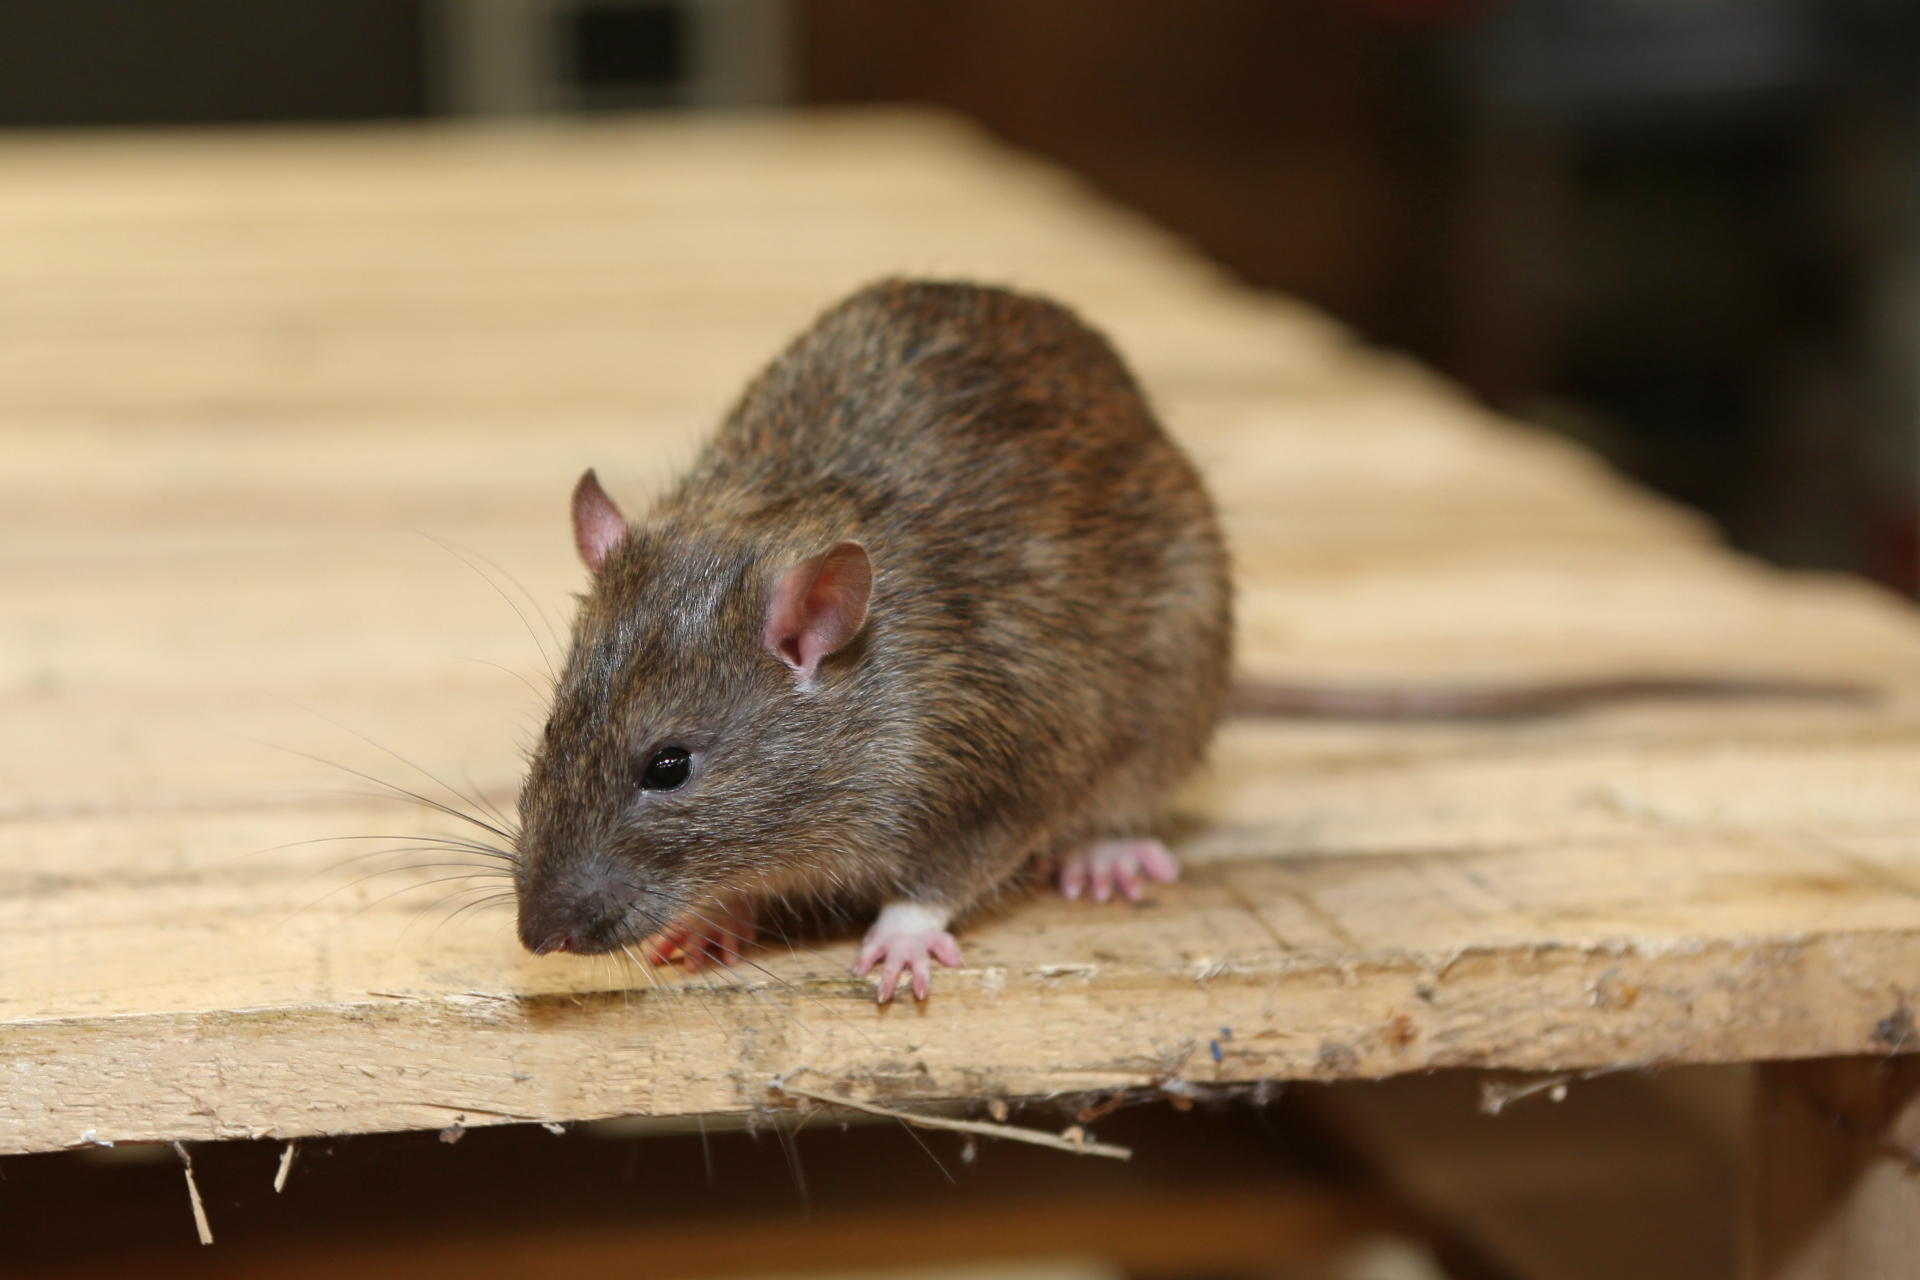 Rat extermination, Pest Control in Catford, Hither Green, SE6. Call Now 020 8166 9746